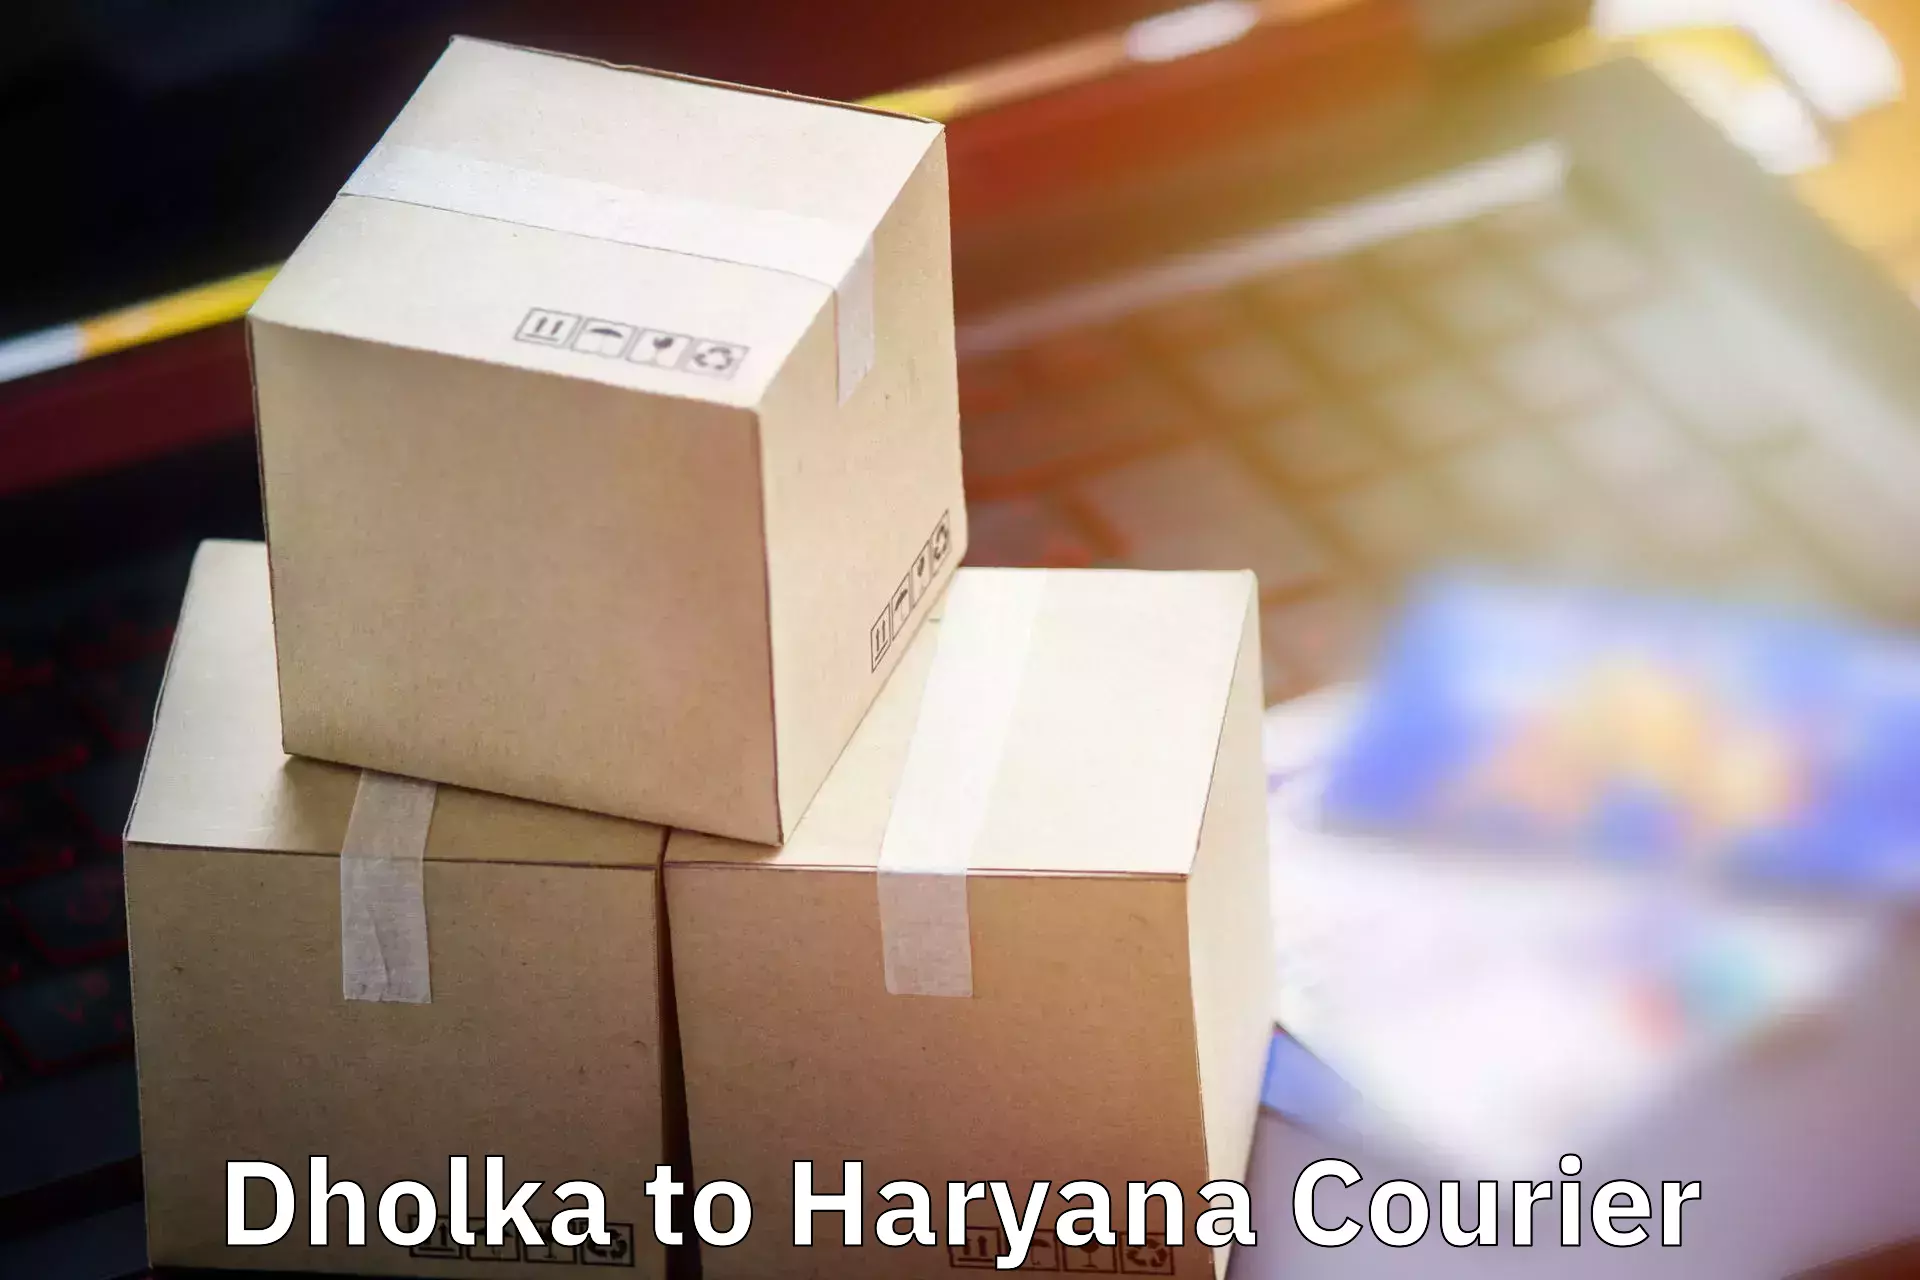 Express luggage delivery Dholka to Gurgaon